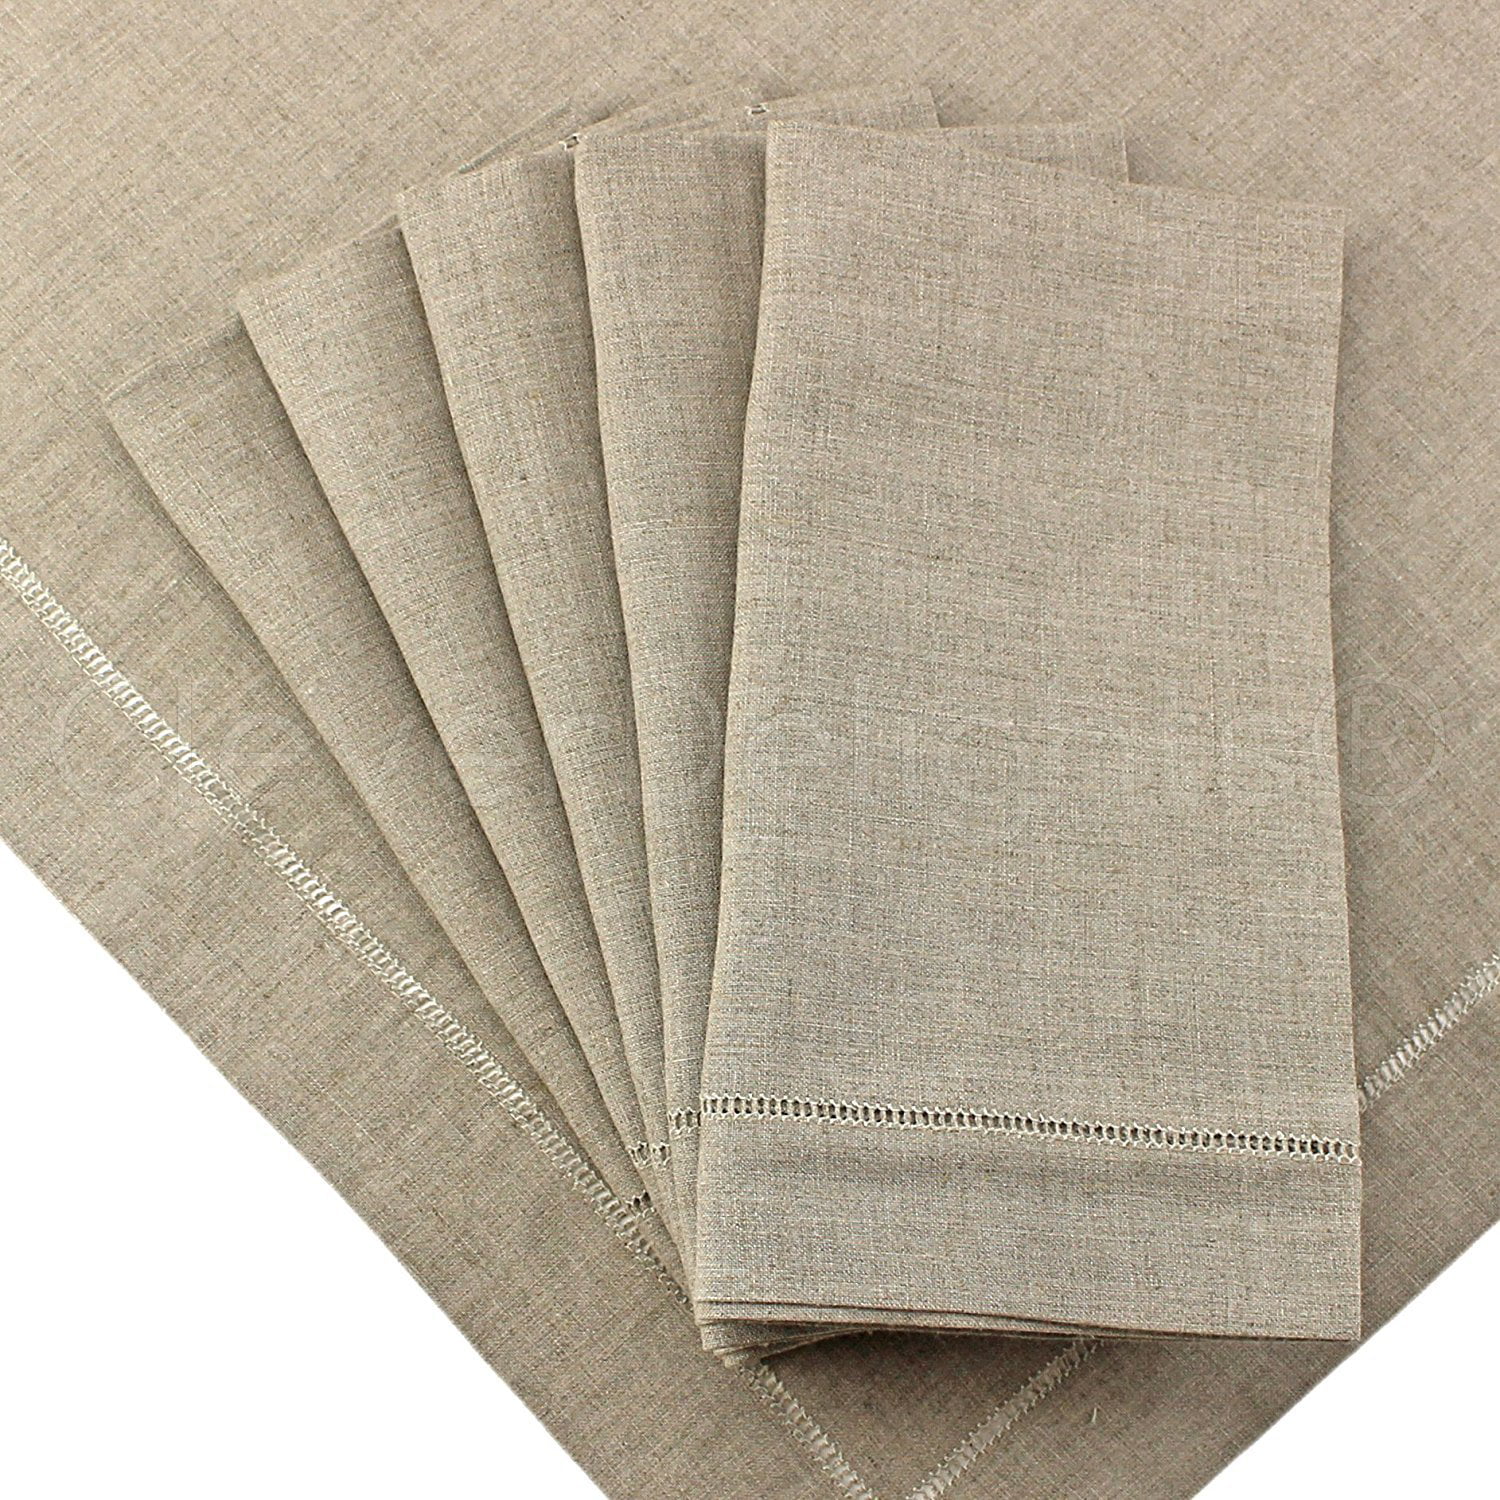 Charcoal 100% Cotton Napkins with Hemstitched, Pack of 12 20 x 20 inch